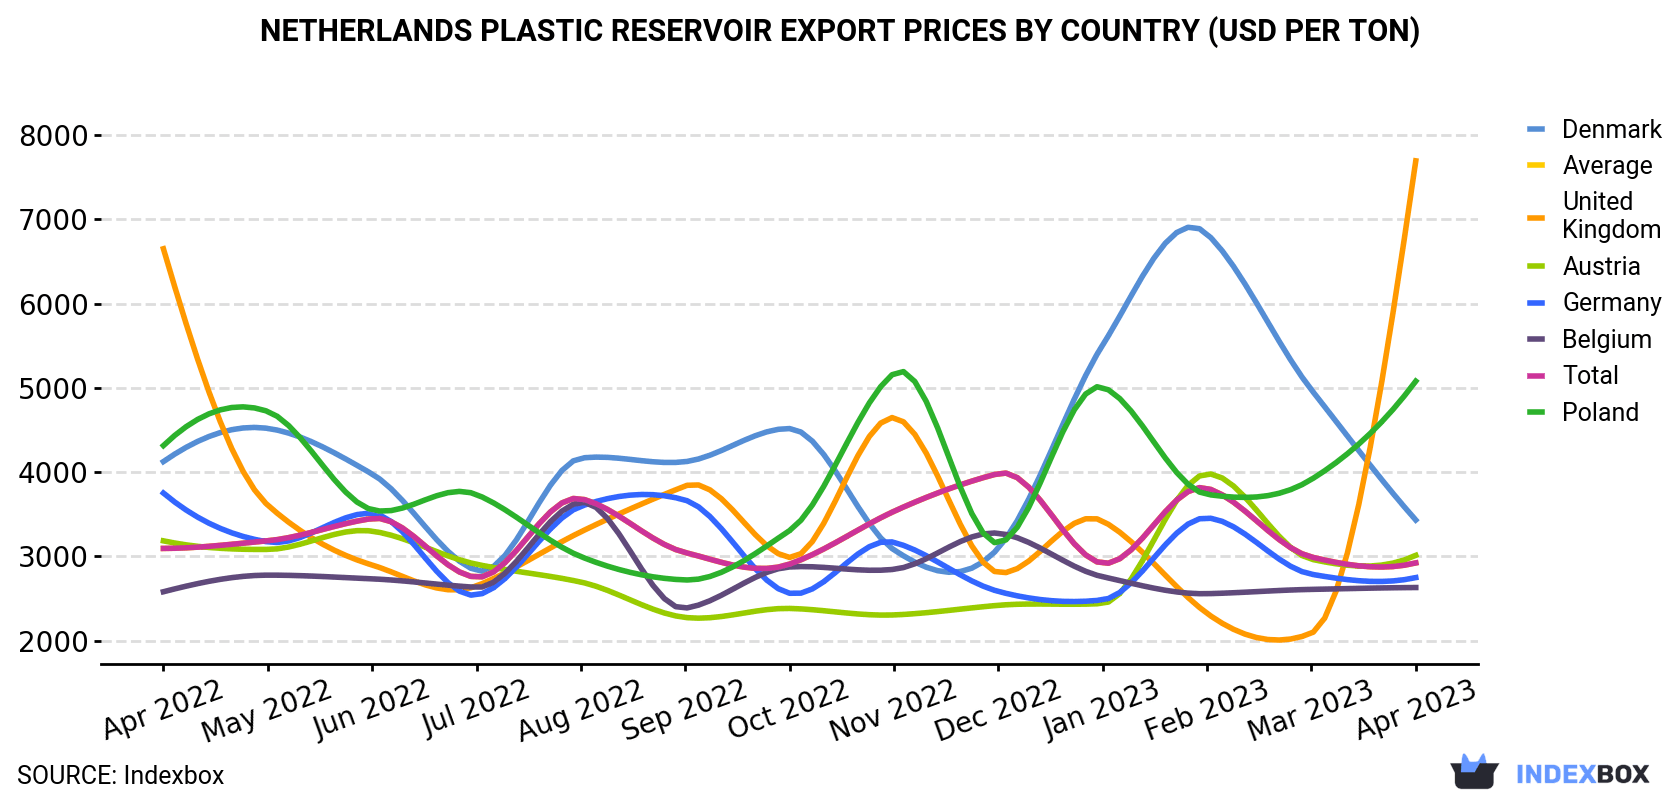 Netherlands Plastic Reservoir Export Prices By Country (USD Per Ton)